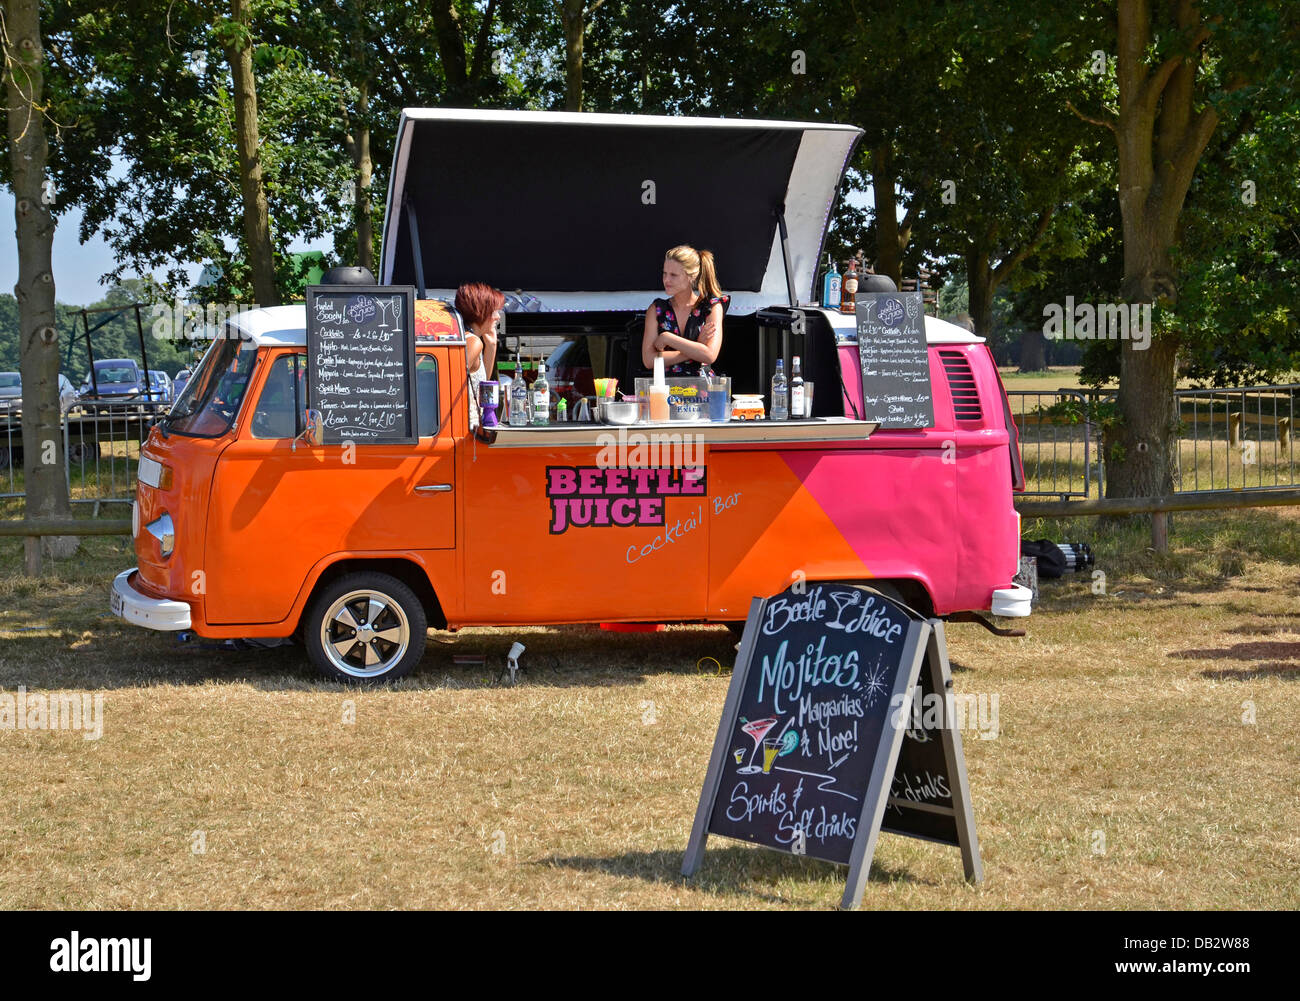 A mobile cocktail bar at a music festival Stock Photo